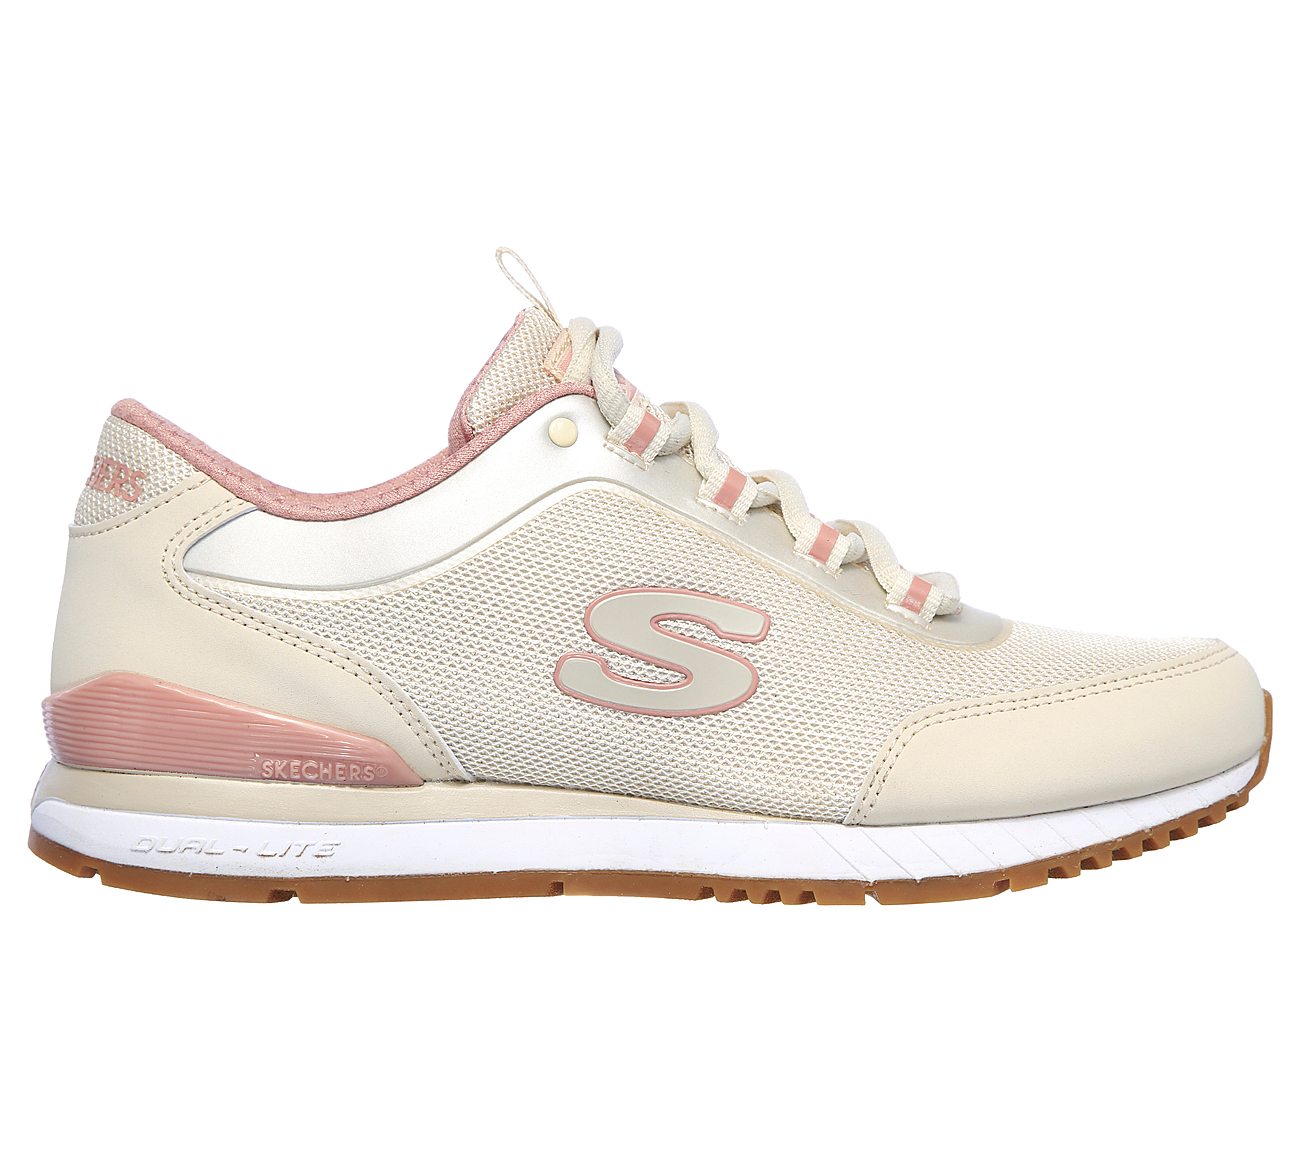 sketcher casual shoes